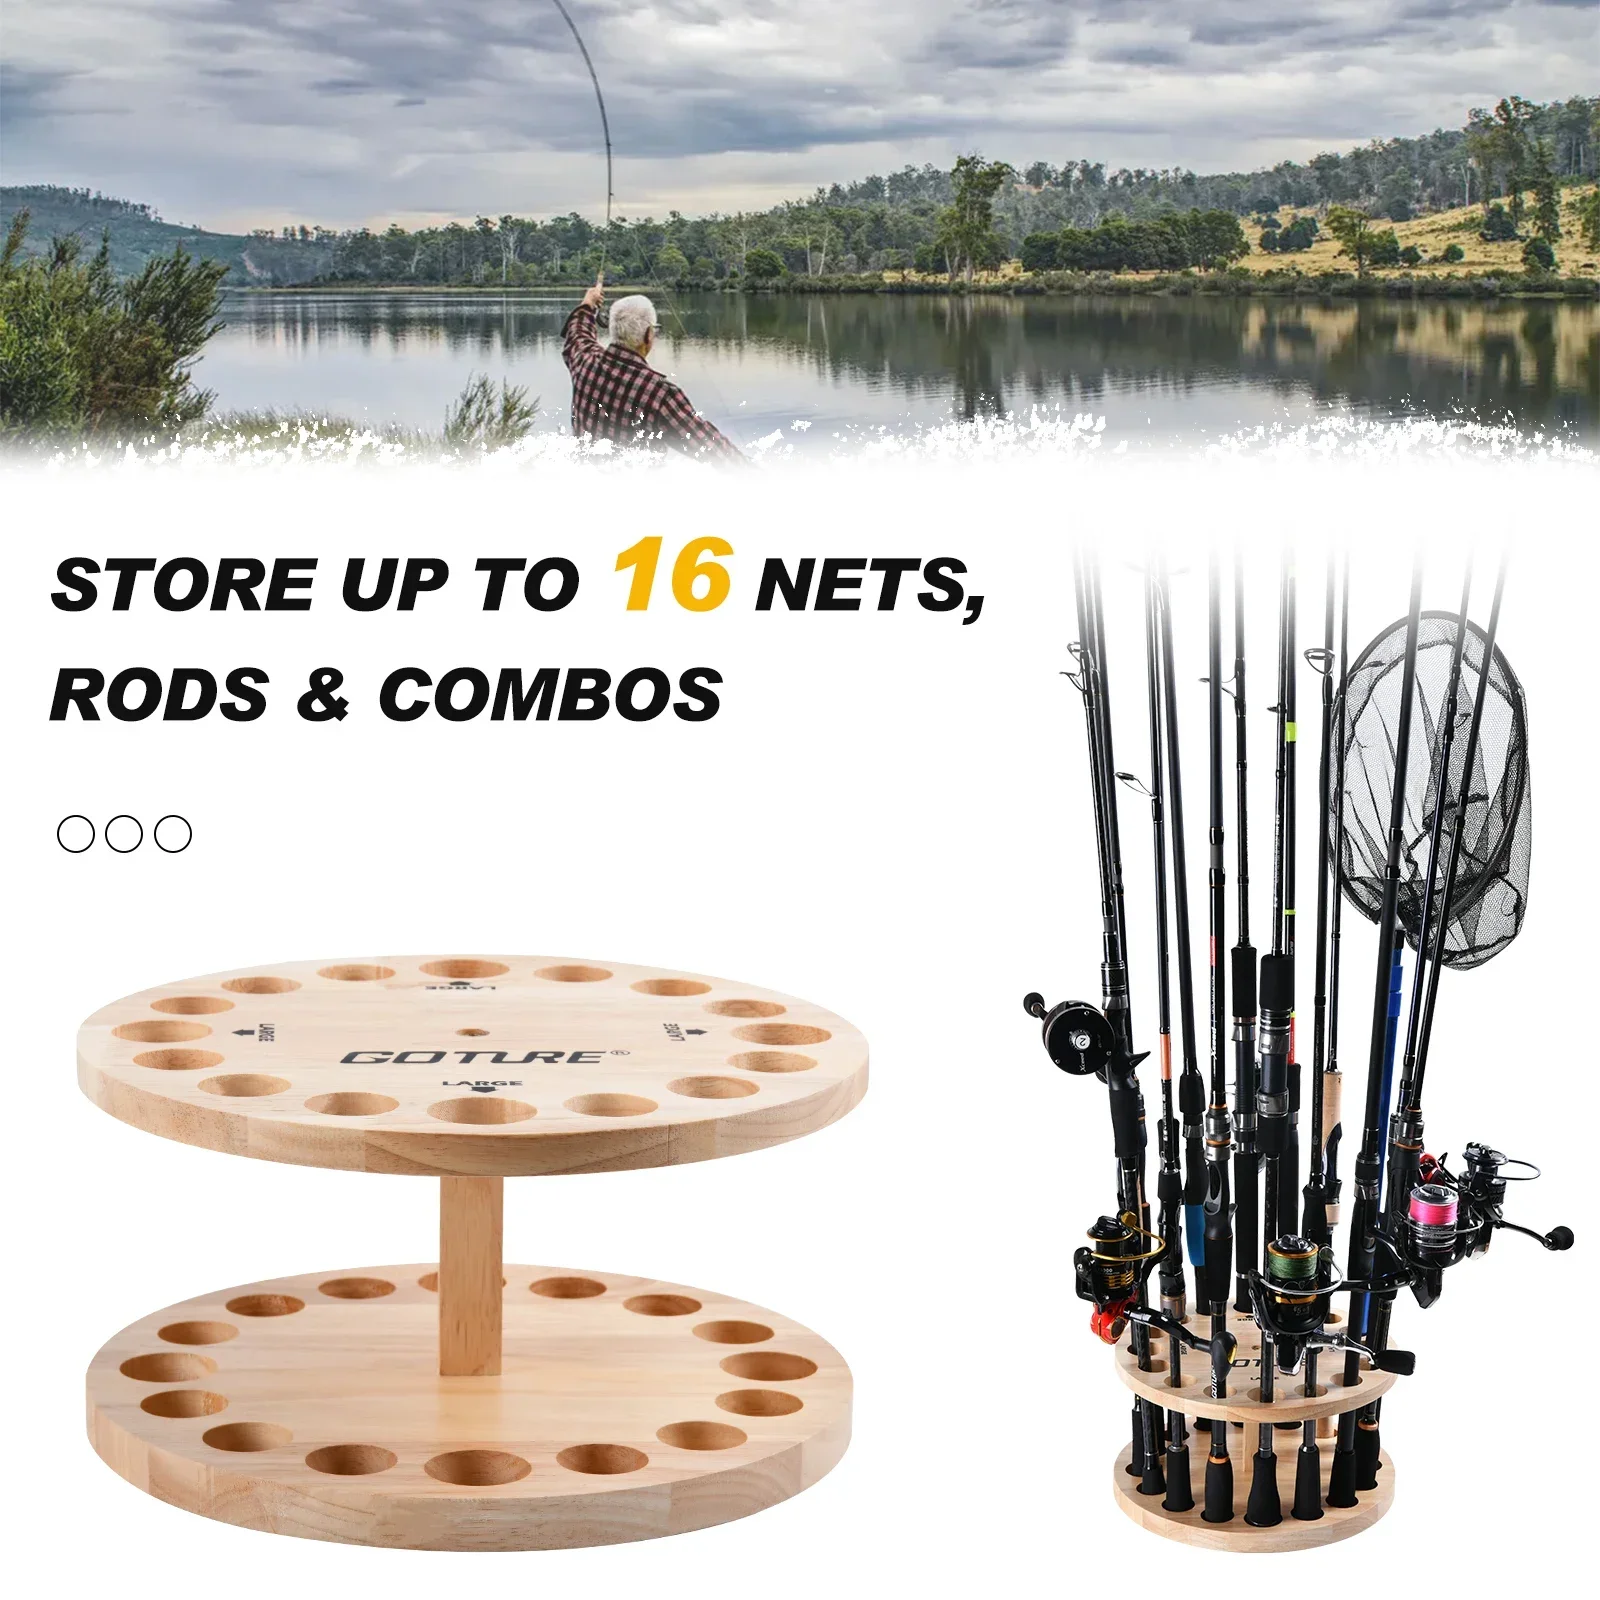  WH5 Horizontal Fishing Rod/Pole Holders For Garage, Wall Or  Ceiling Mounted Fishing Rod Rack, Solid Wood Fishing Rod Holder Holds Up To  5 Rod Or Combos Or Nets Storage Racks